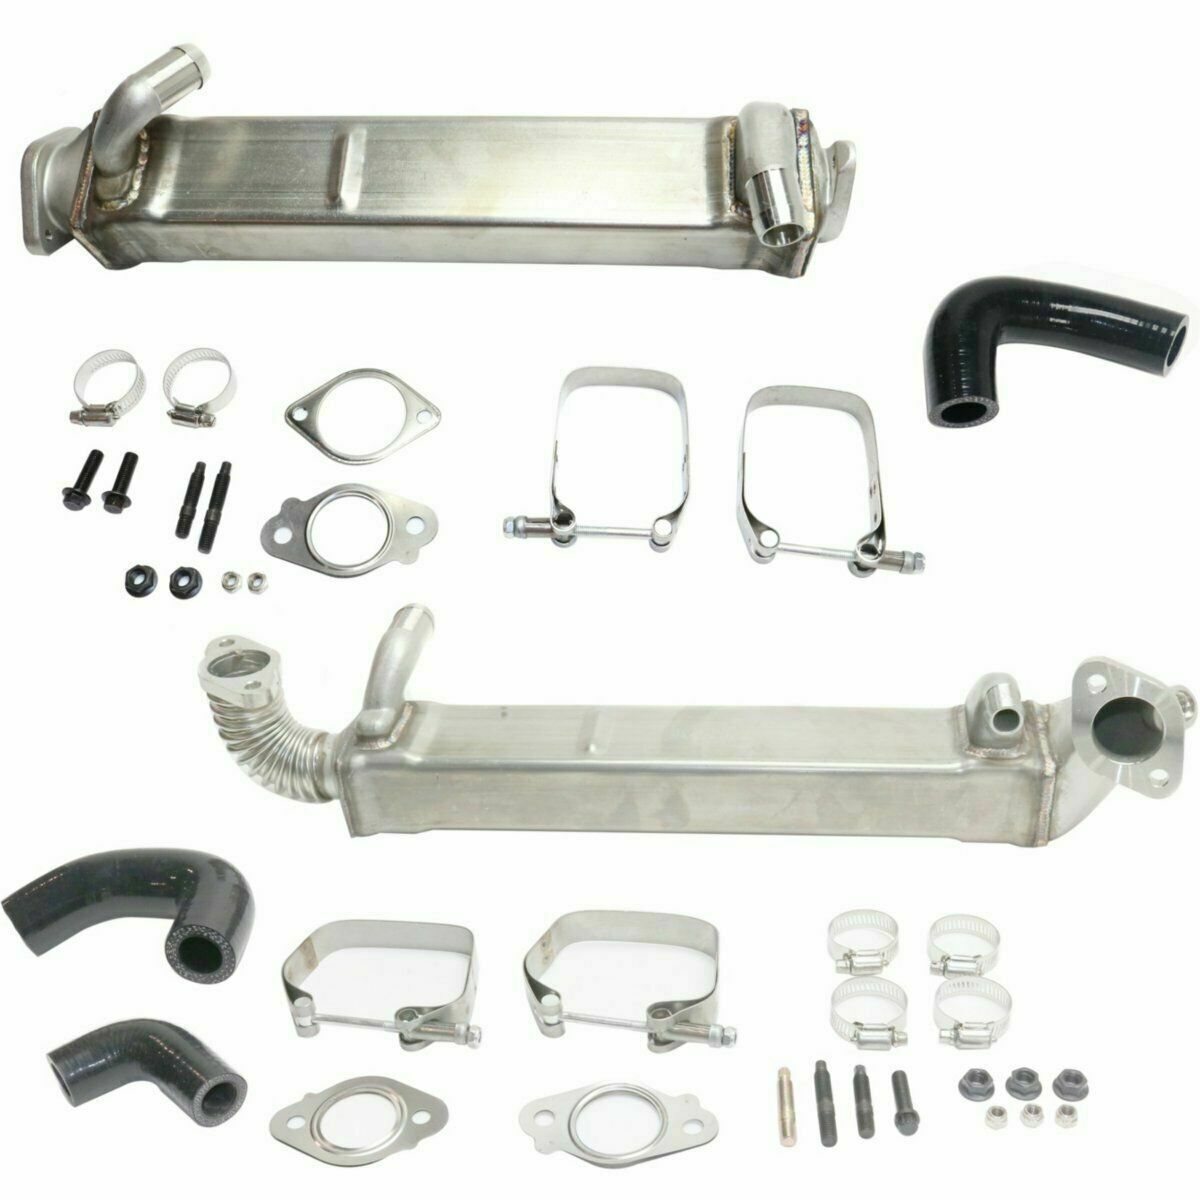 Rudy's Performance Parts - Rudy's Heavy Duty Vertical & Horizontal EGR Cooler Kit For 08-10 6.4 Powerstroke